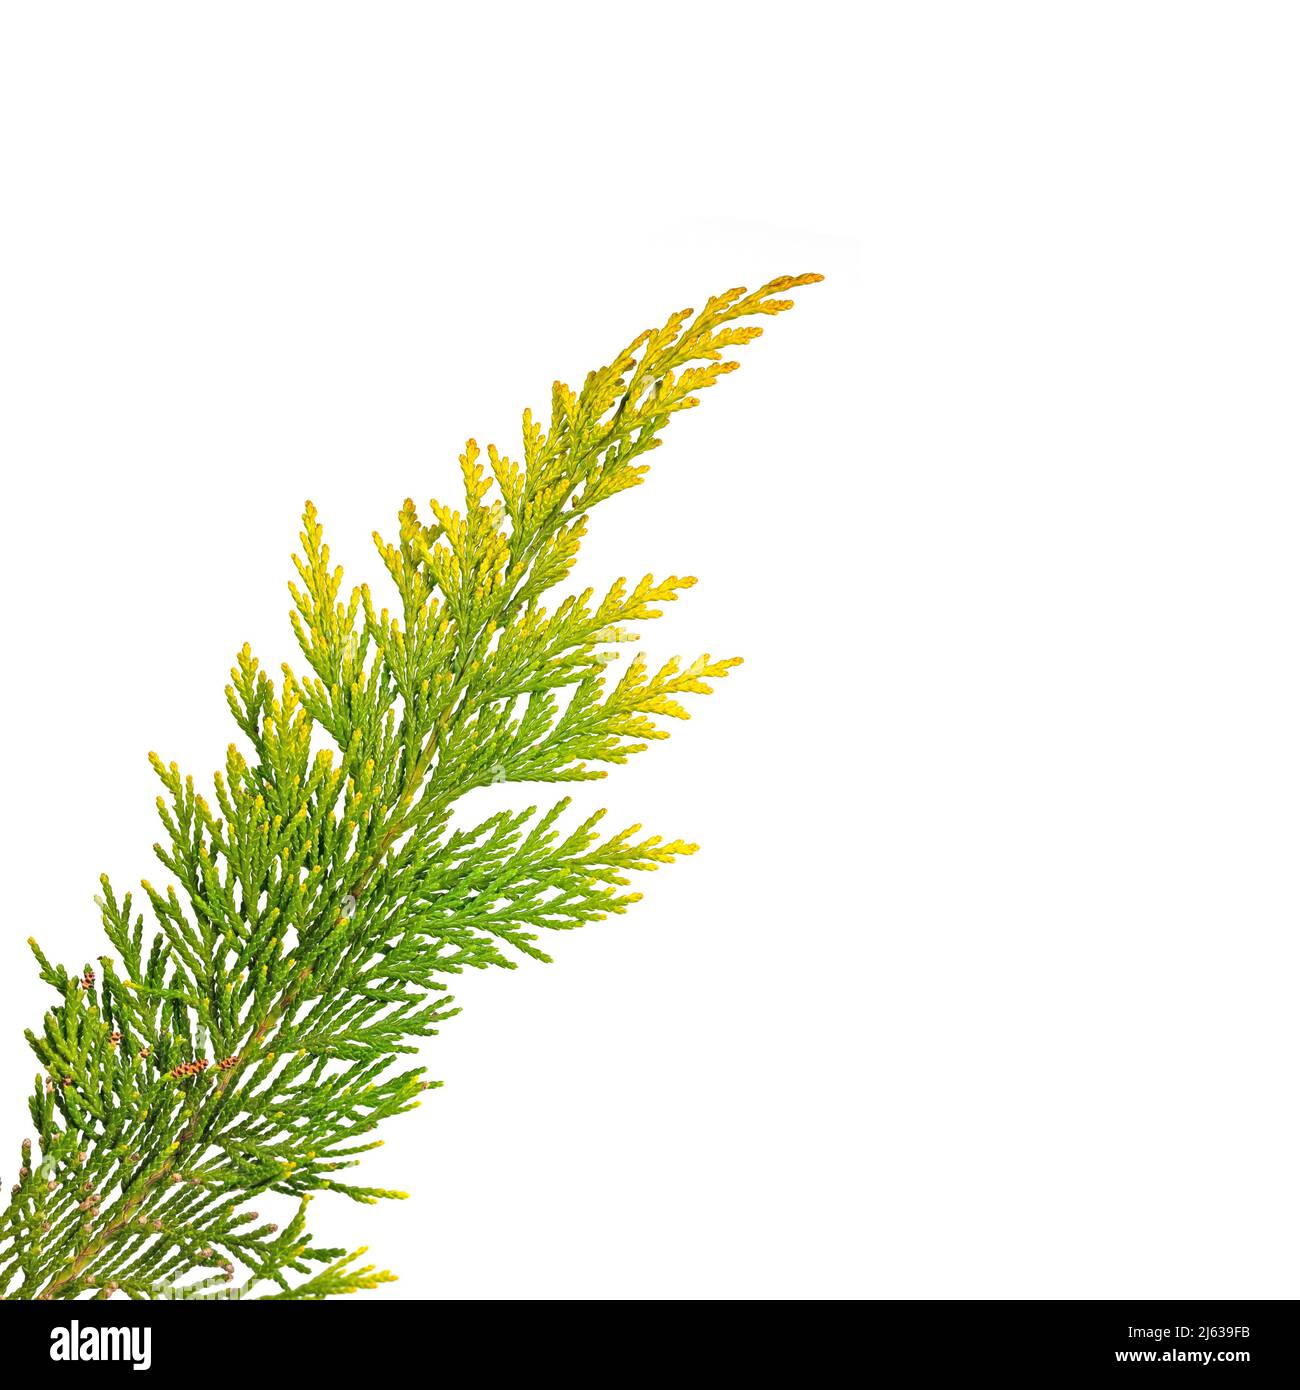 Leaves of Lawson's cypress against white background Stock Photo